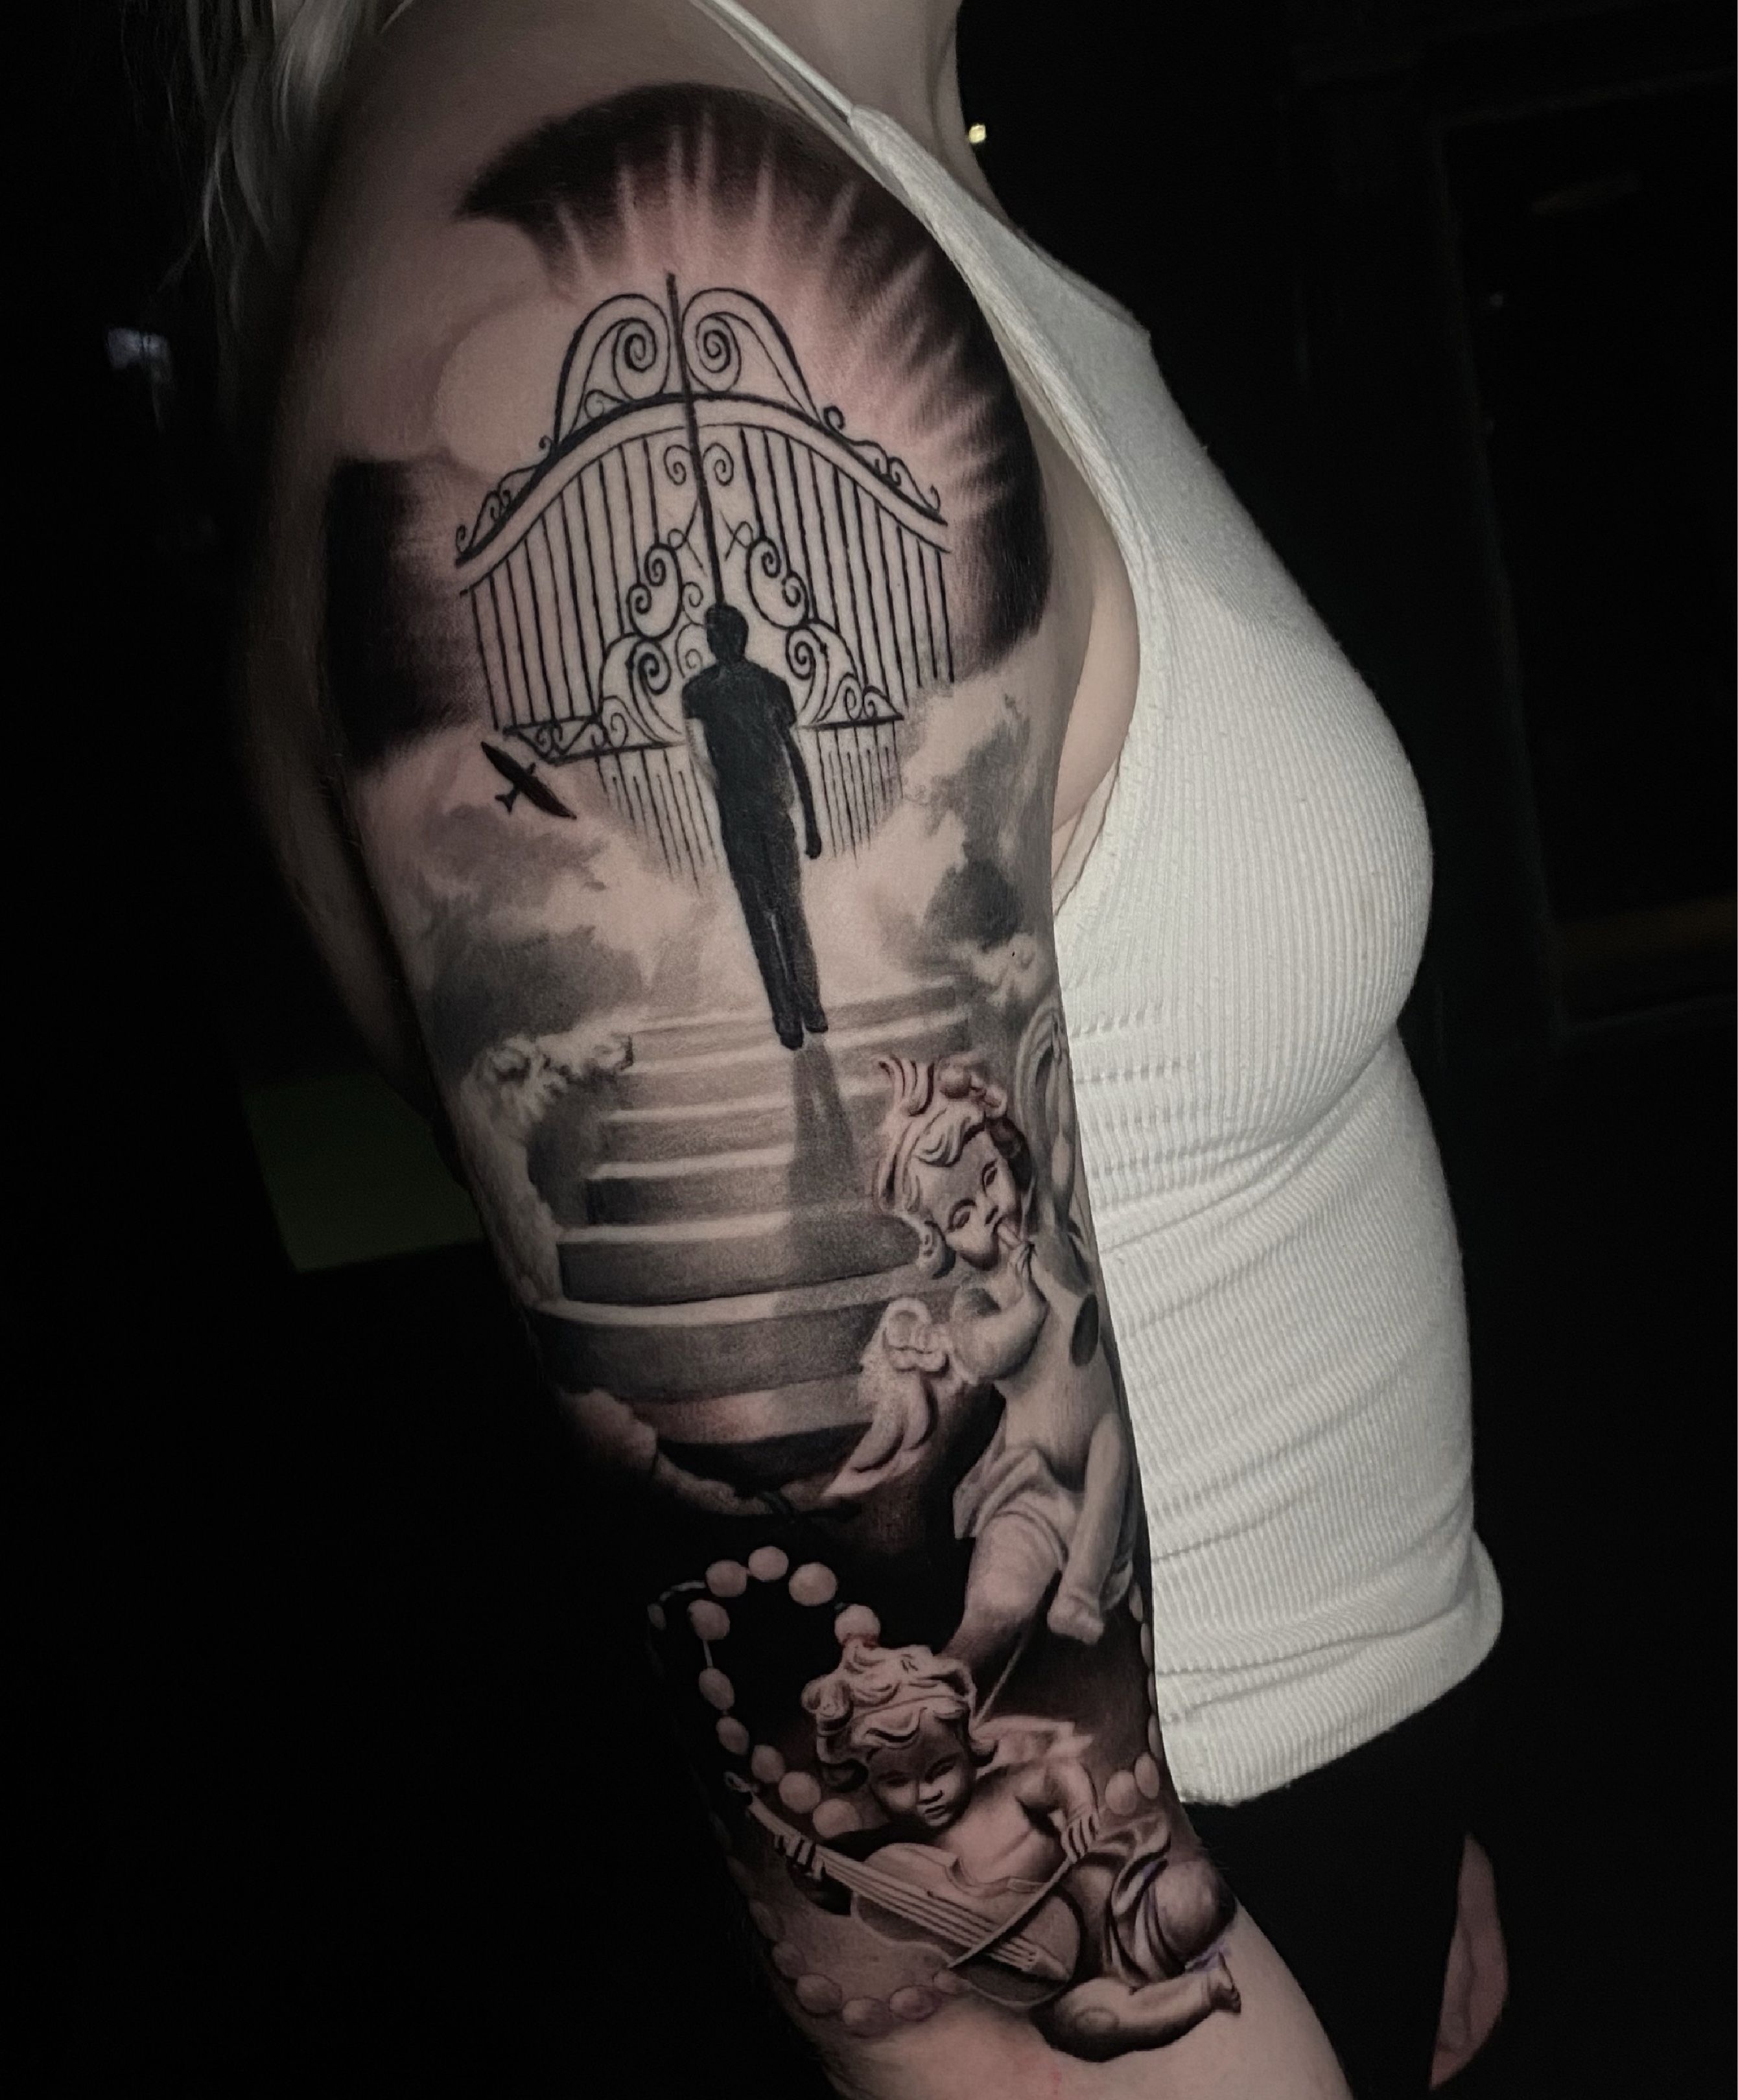 Pearly Gates of Heaven by Cat Johnson TattooNOW